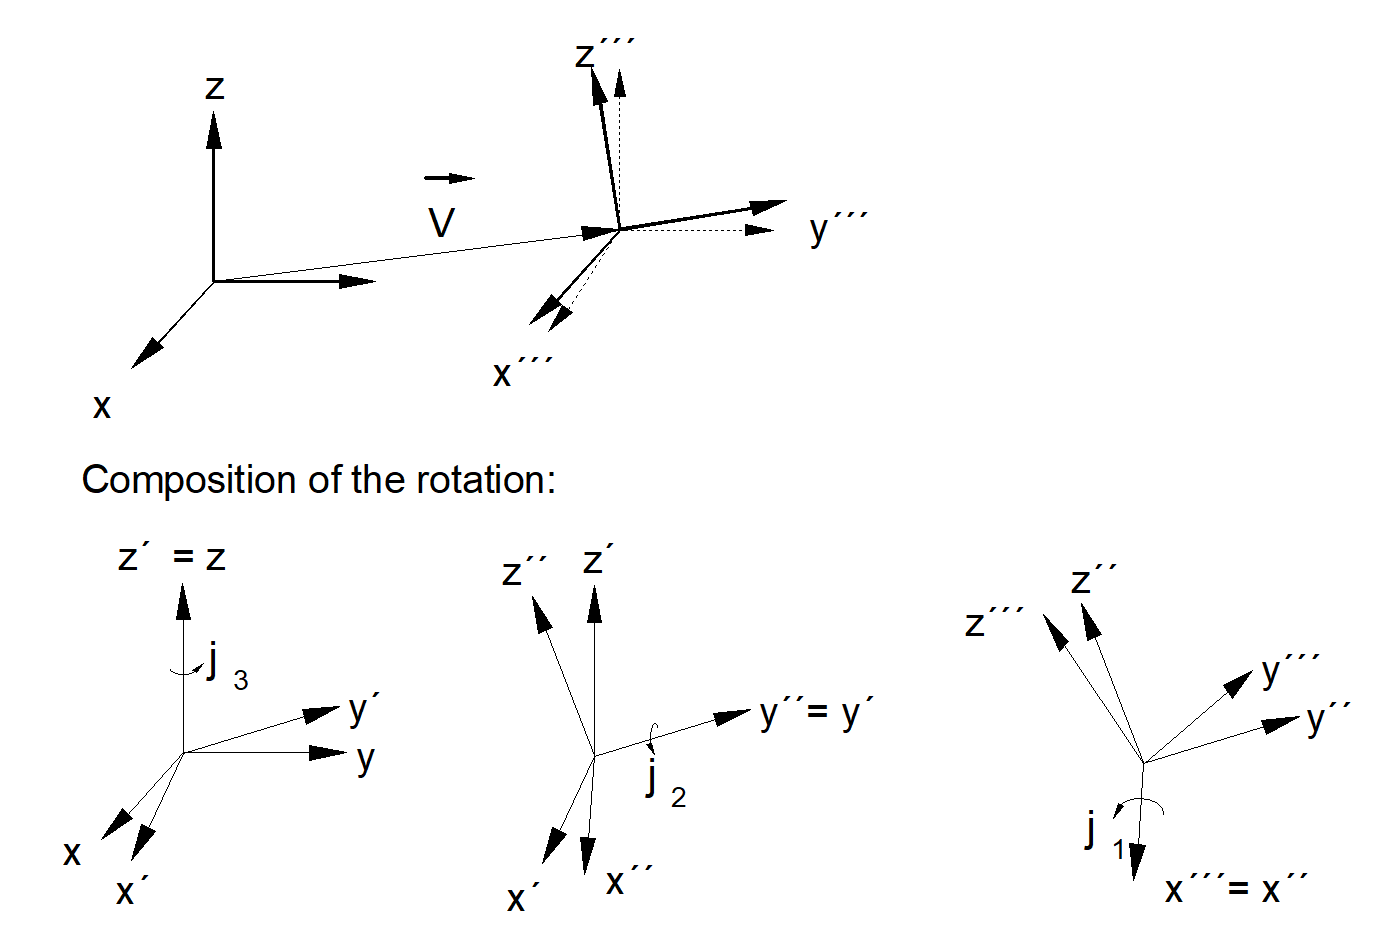 Composition of the rotation